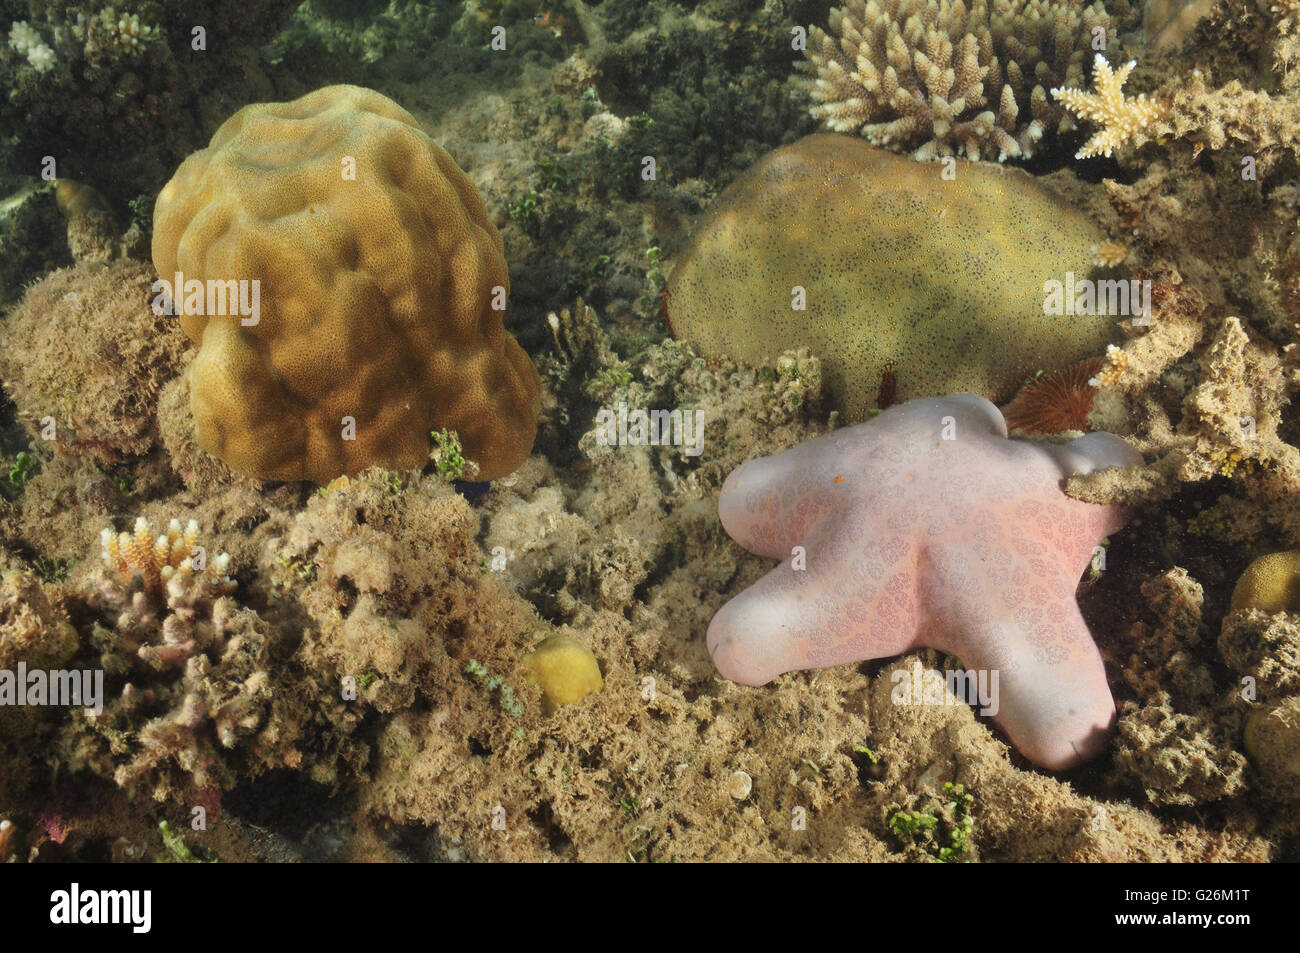 Sea stars of the coral sea on silty bottom Stock Photo